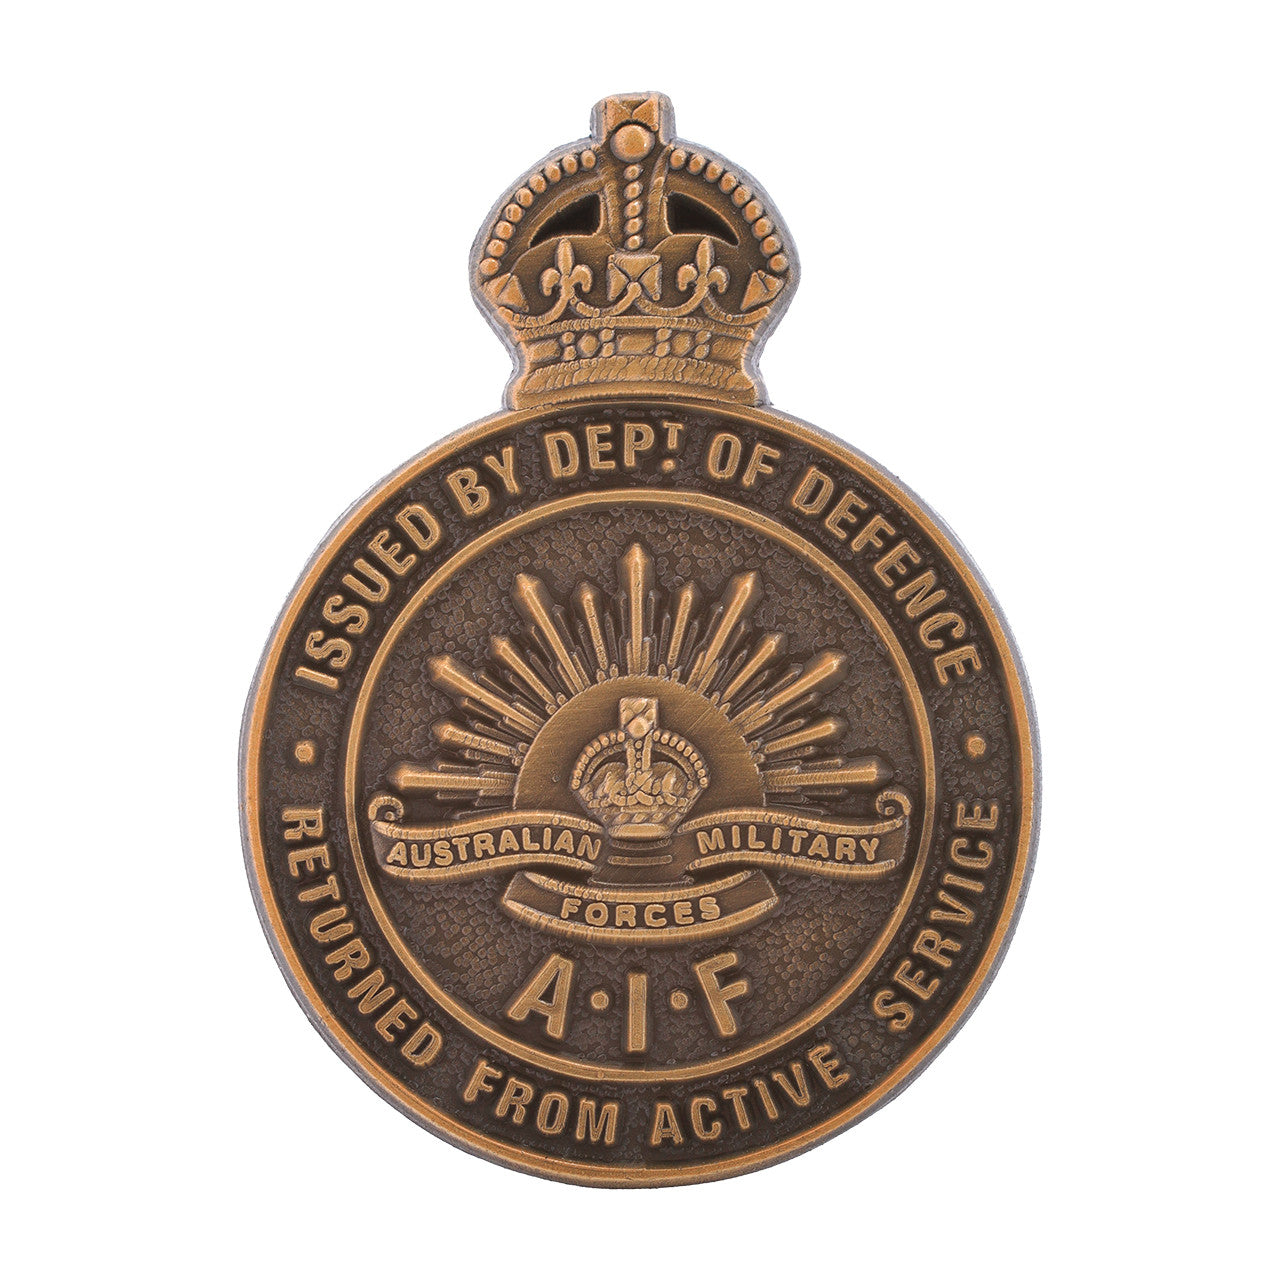 A stunning replica creating a lapel pin full of history to cherish. This beautifully detailed lapel pin is inspired by the Returned from Active Service Badge 1914-1919 presented to the Australian Imperial Force upon their return from active service. Honour their service and share in Australia's proud military history with this sensational lapel pin. www.defenceqstore.com.au